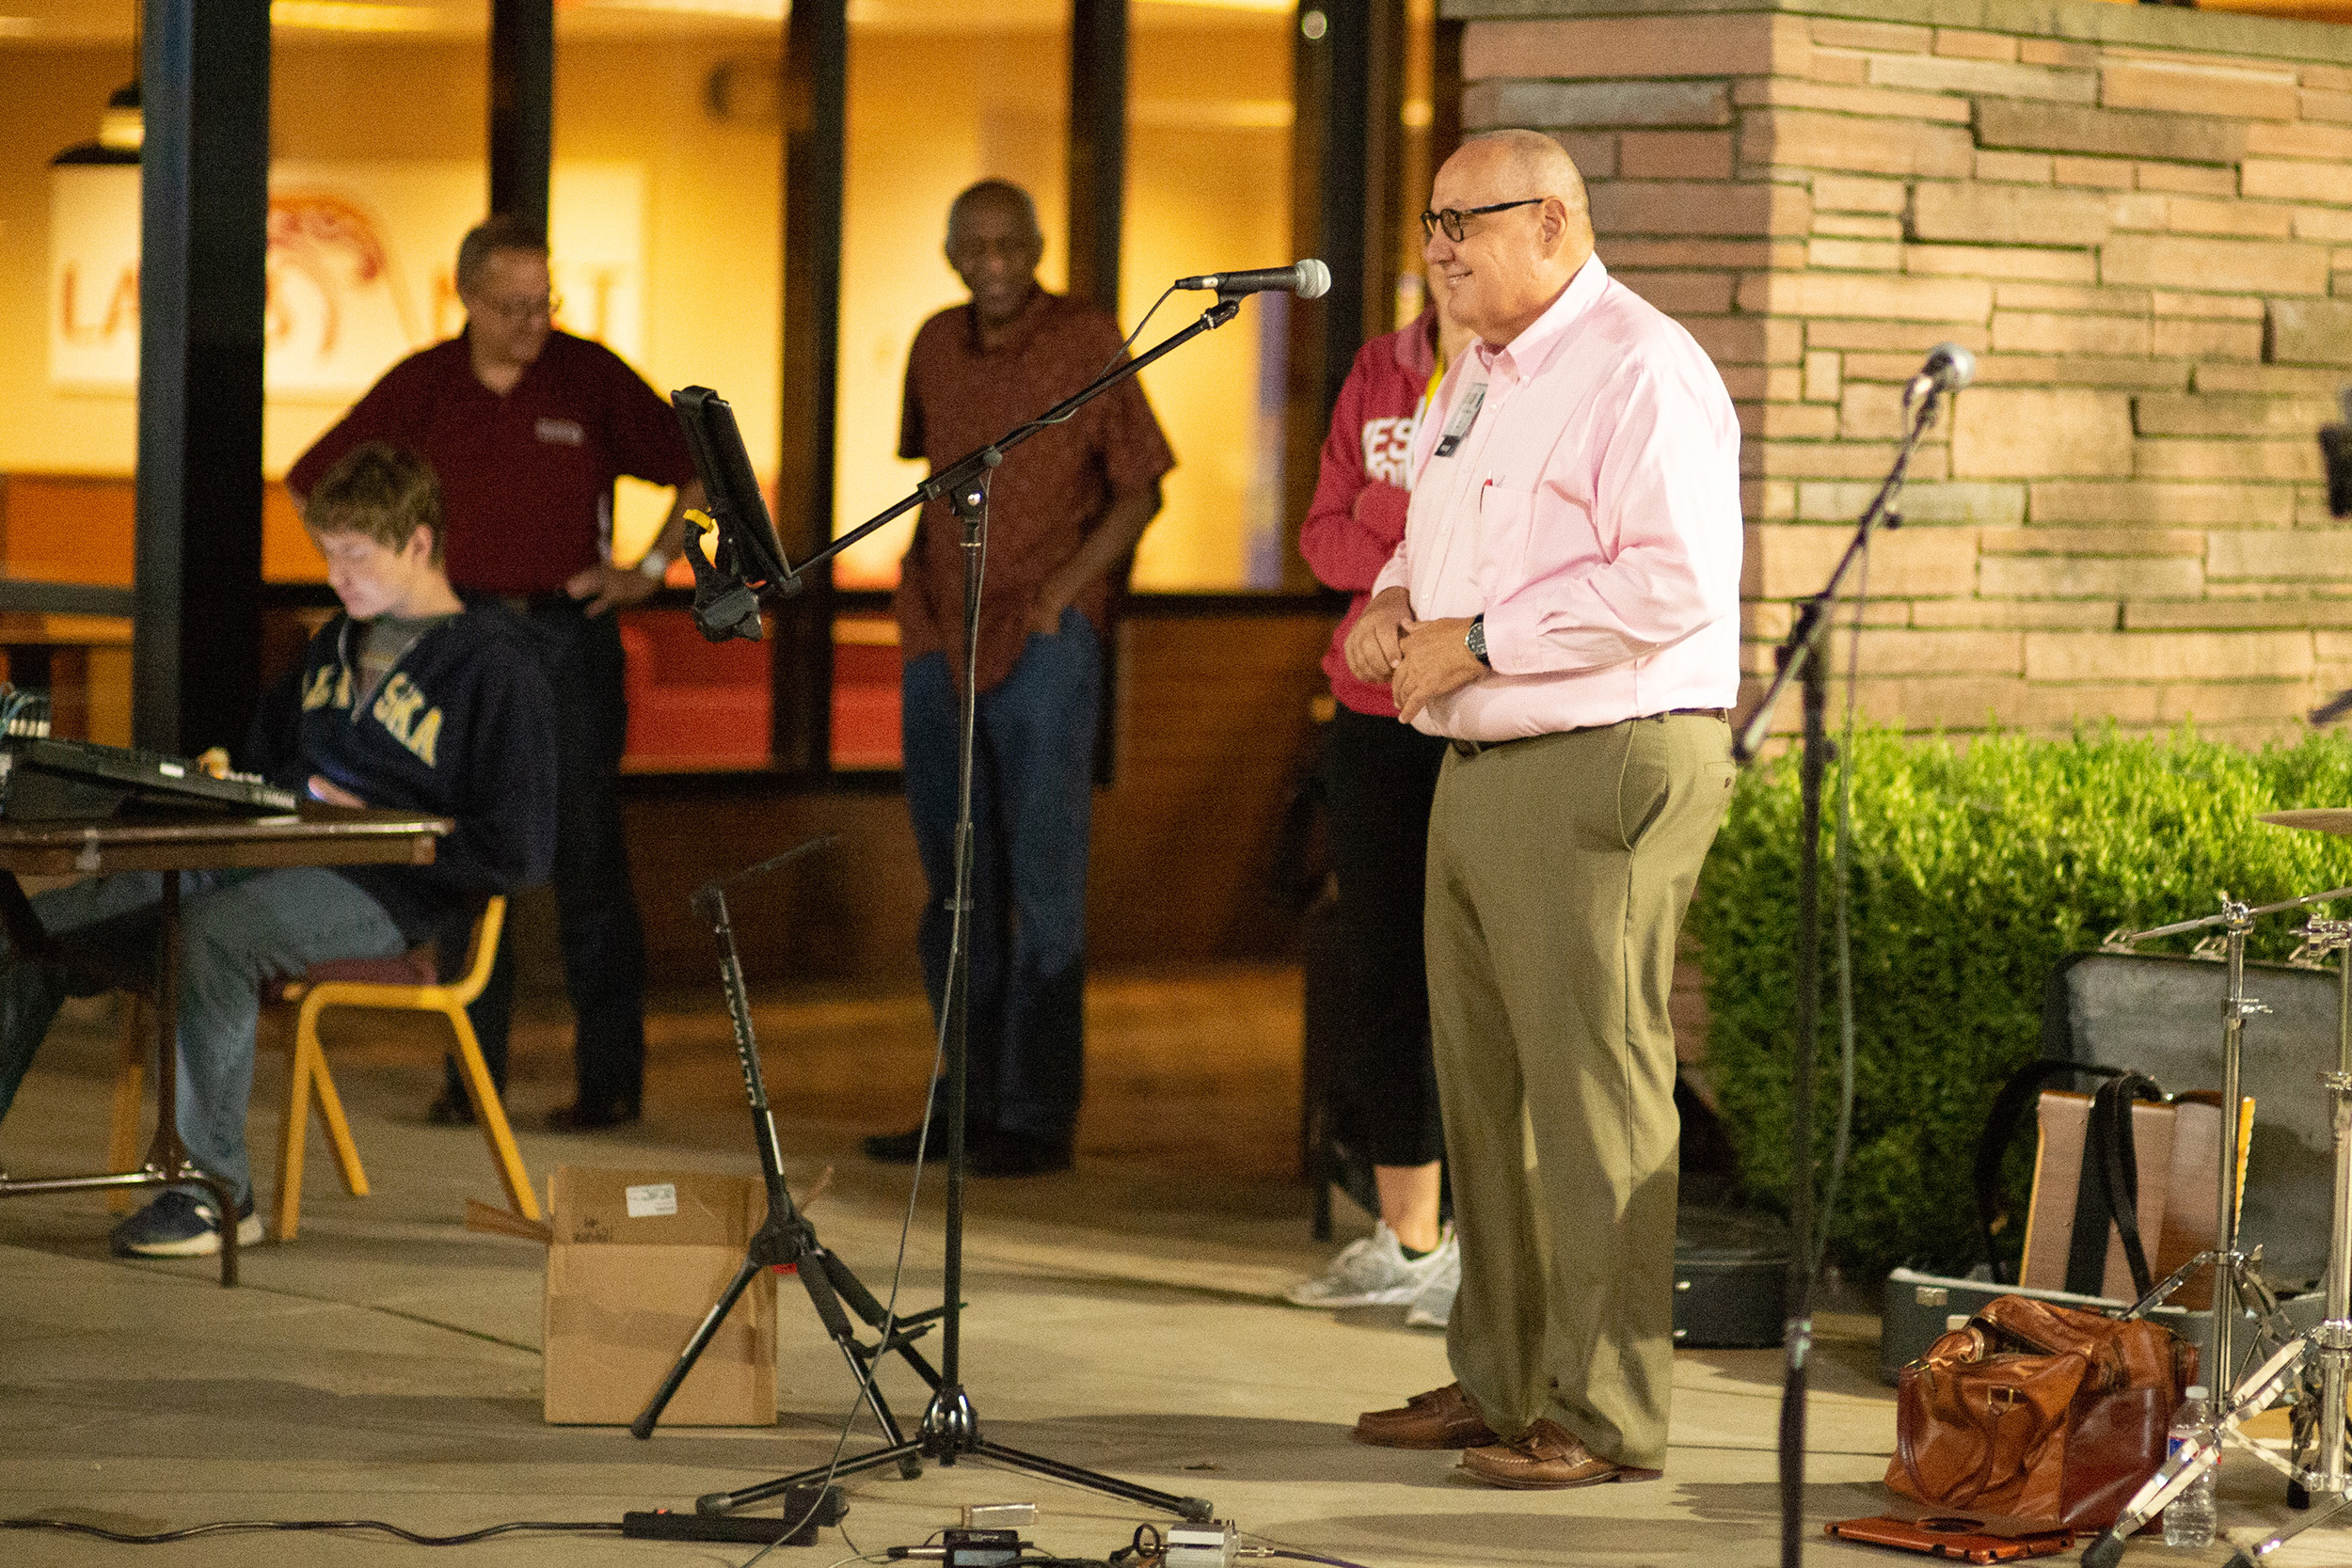 Hesston College Homecoming 2021 - Tim Shue and Friends concert - Dallas Stutzman recognition